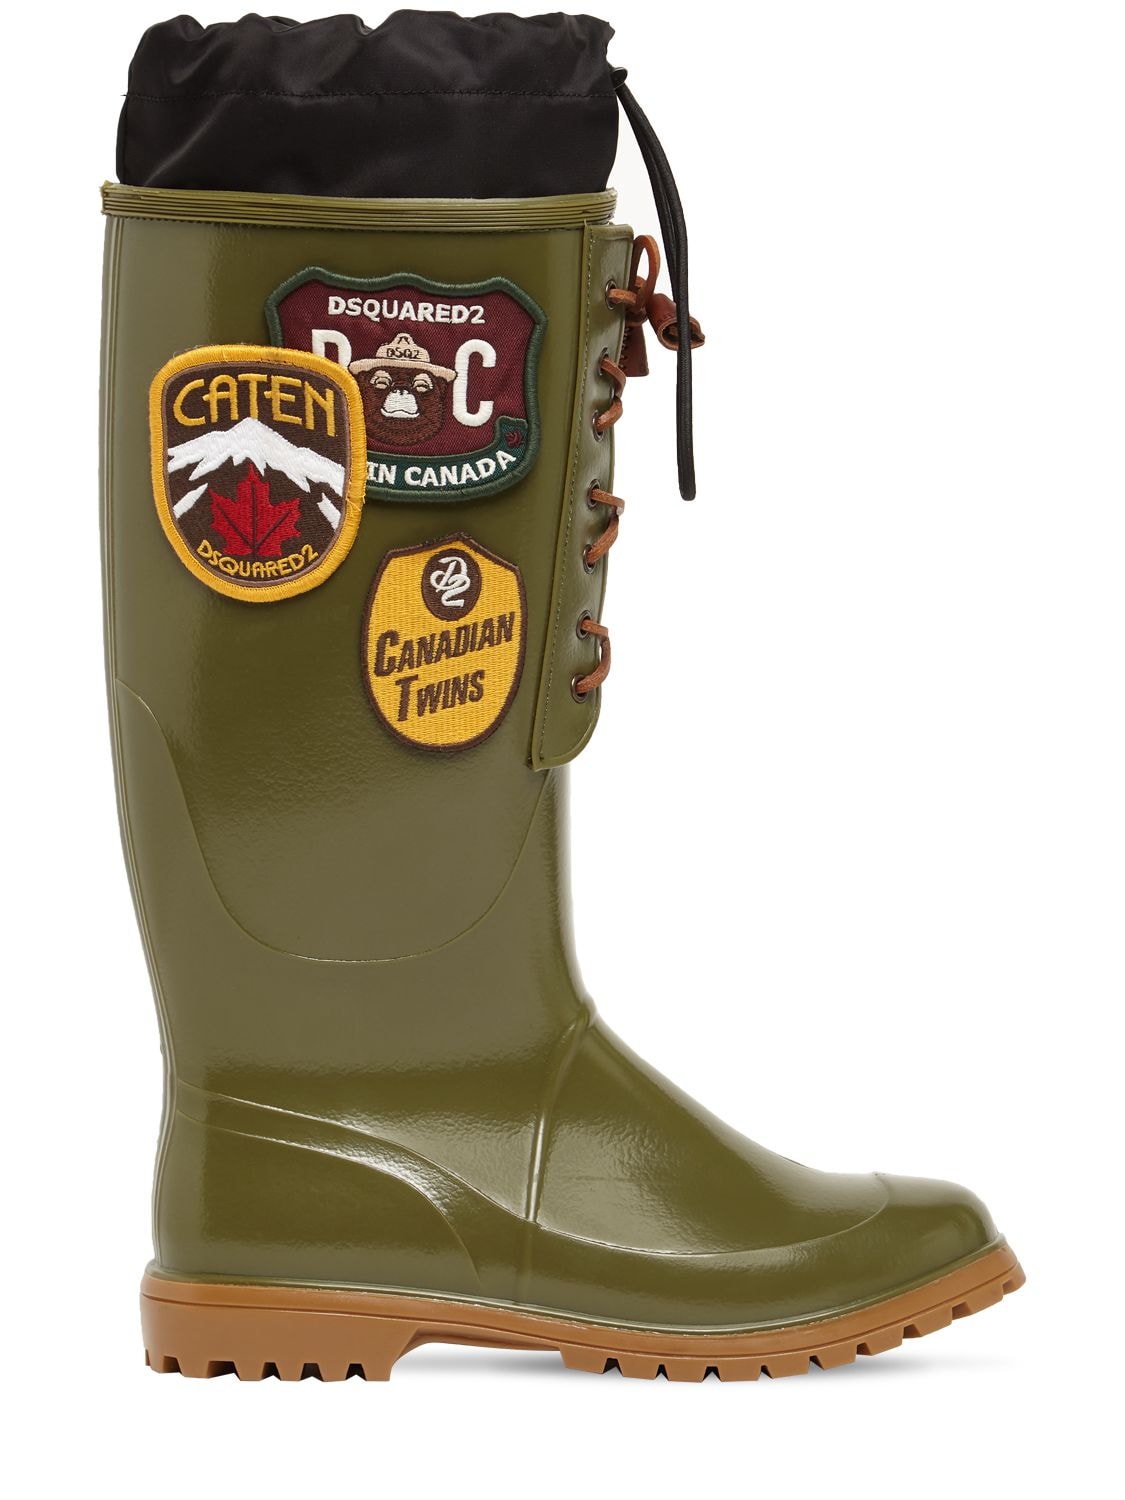 Rubber Rain Boots W/ Patches